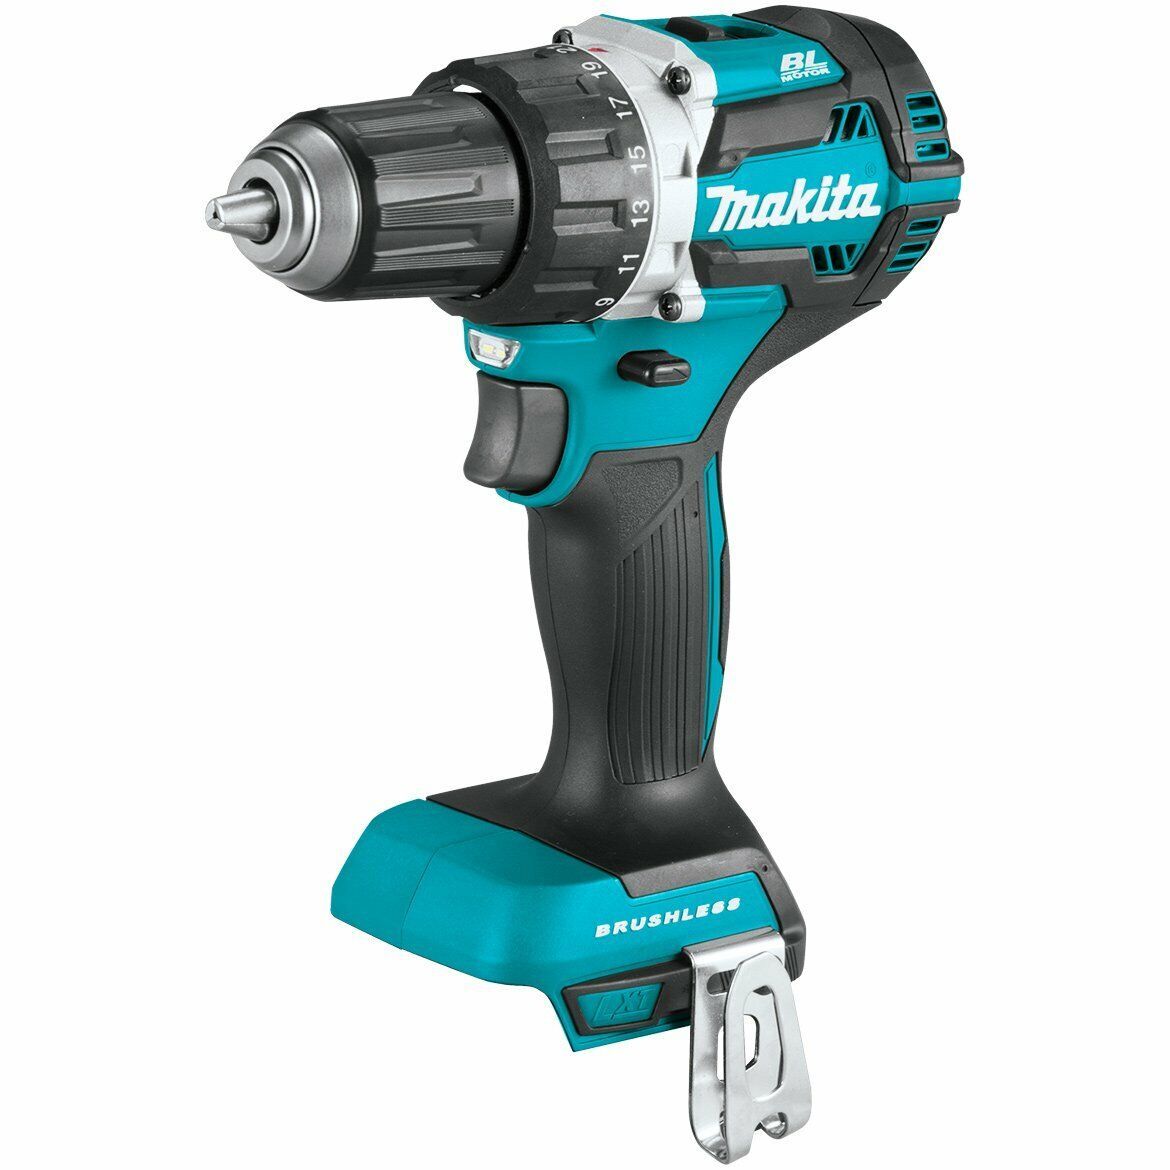 Primary image for 18-Volt 1/2-Inch Lithium-Ion Cordless Driver-Drill - Bare Tool